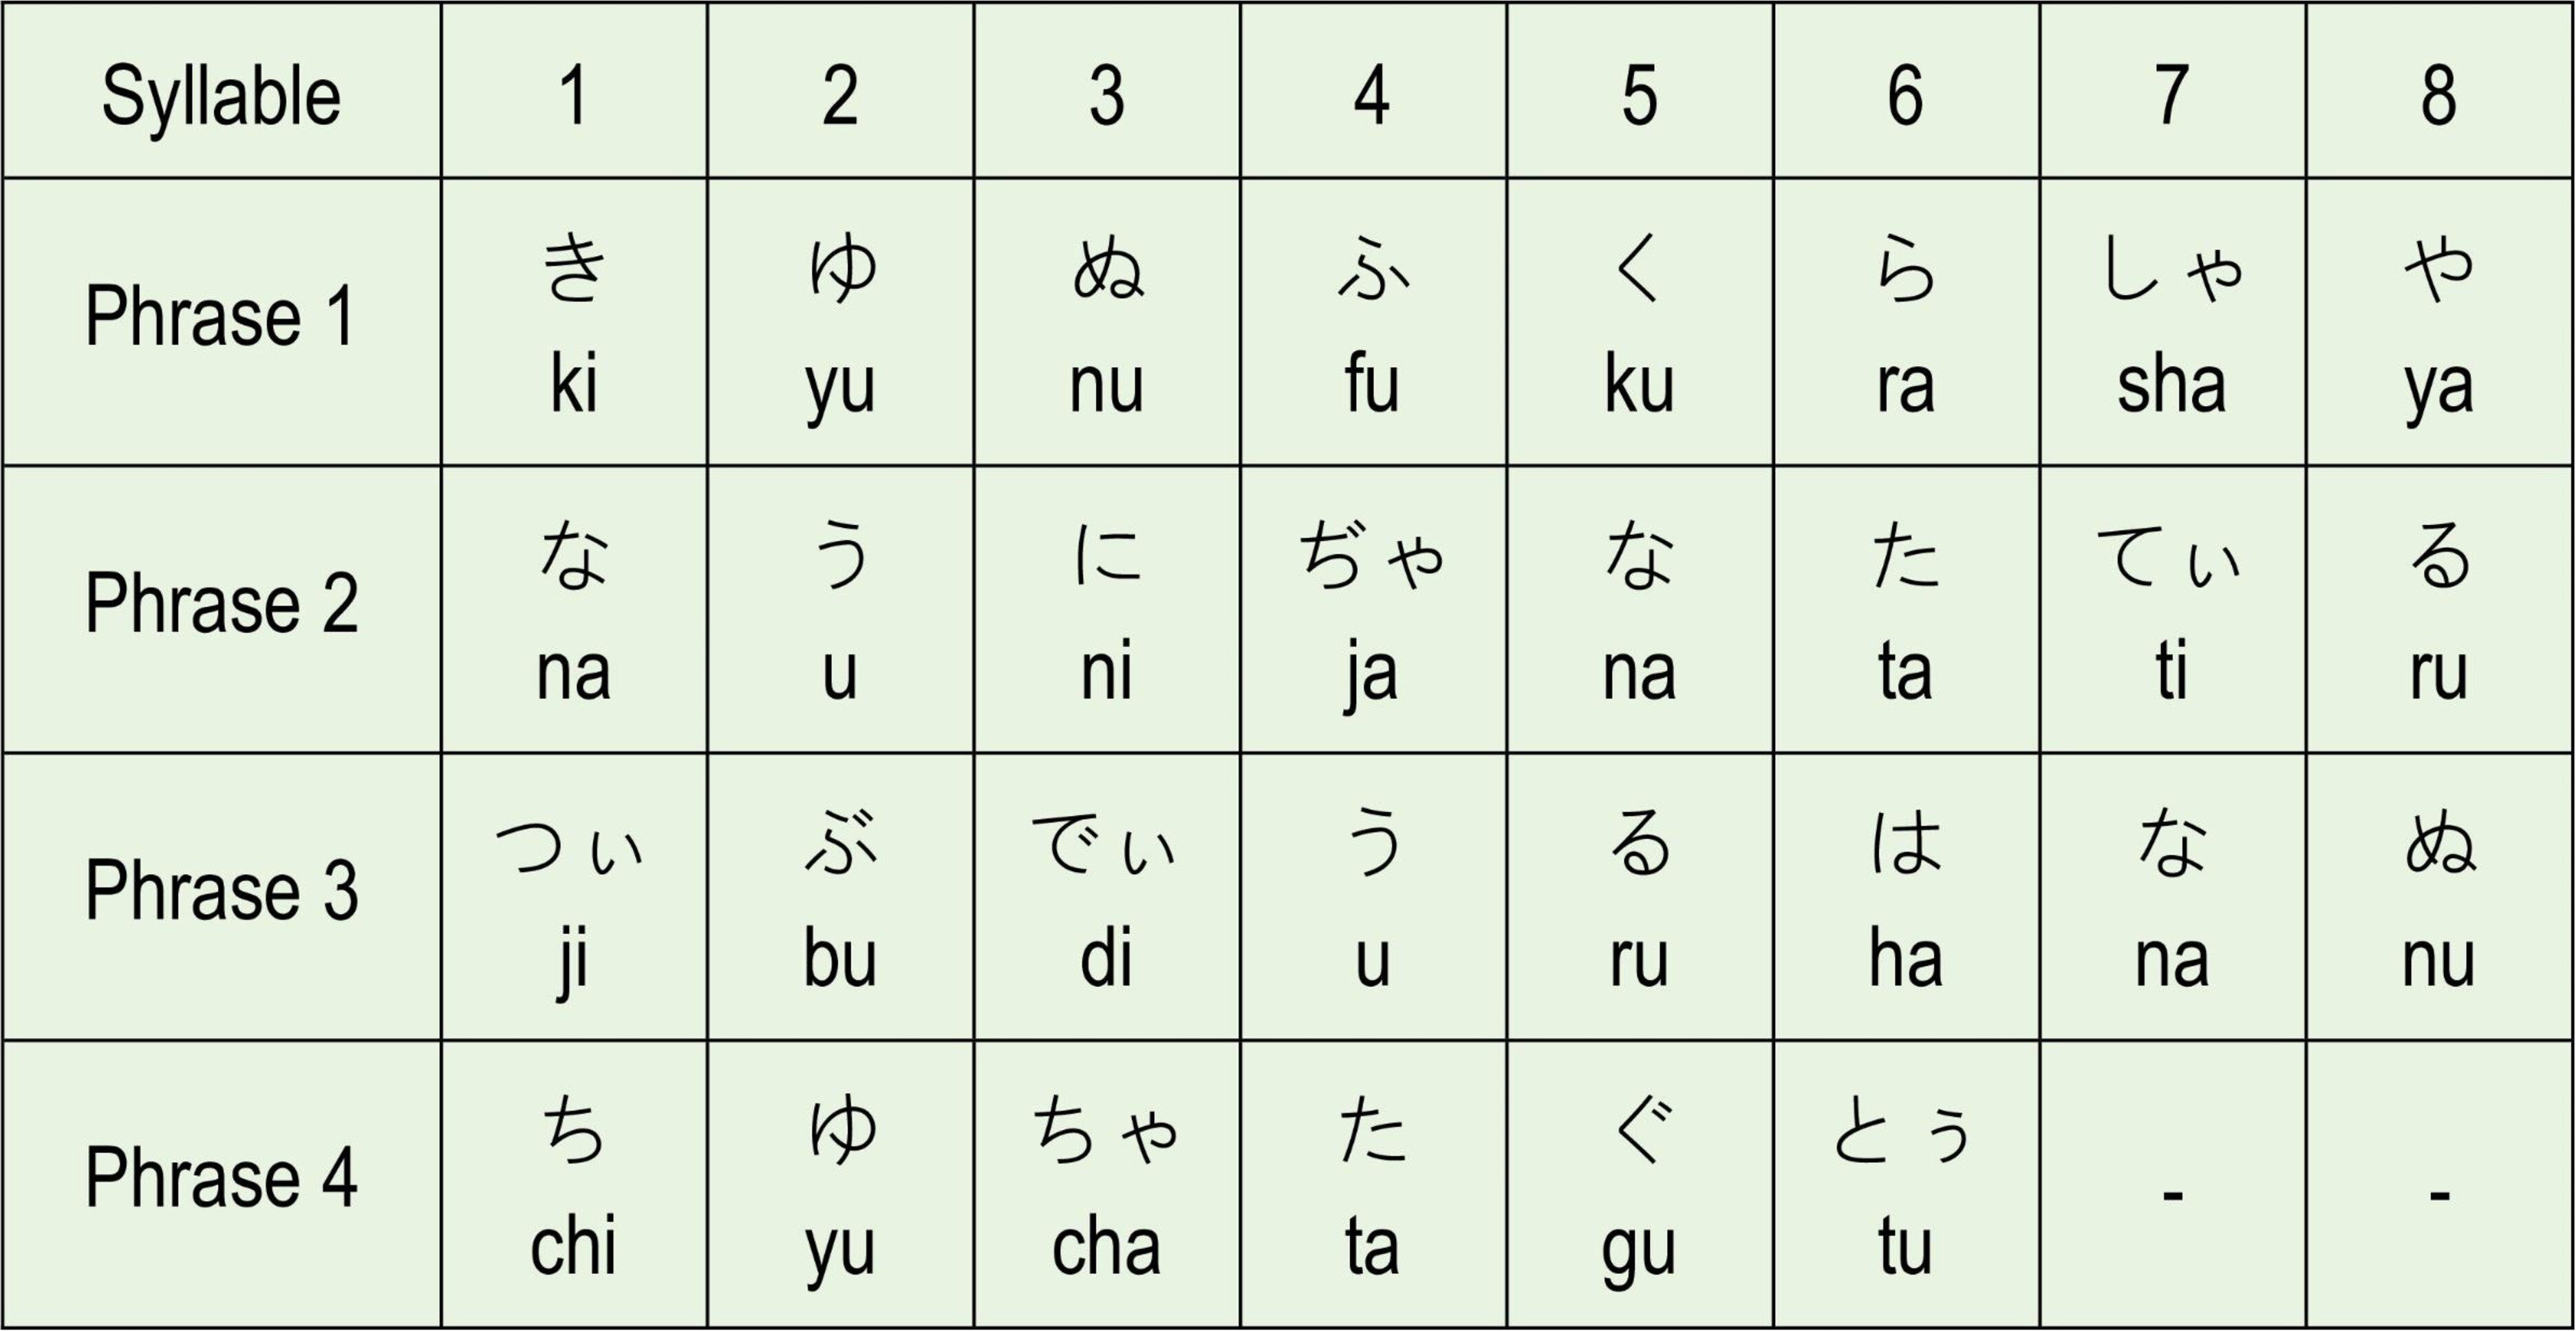 Kagiyadefū Bushi is made up of specific syllabic patterns. The first three phrases each contain eight syllables, while the fourth phrase contains only six.